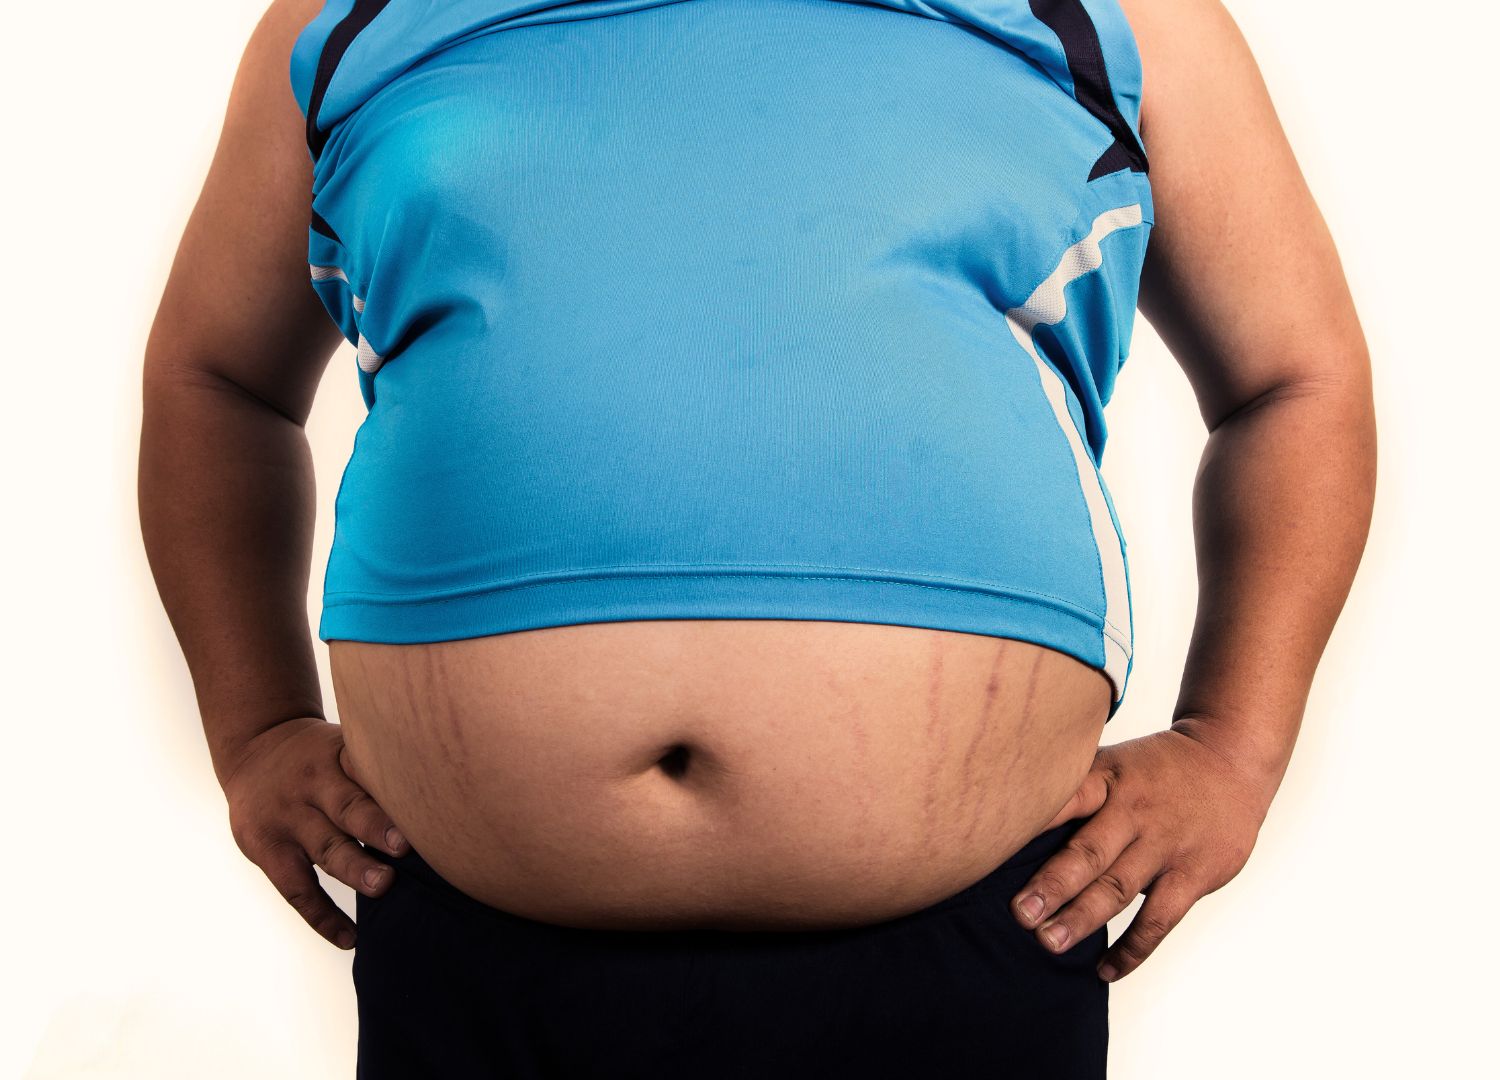 Pot Belly: Causes, Health Risks, and Effective Solutions